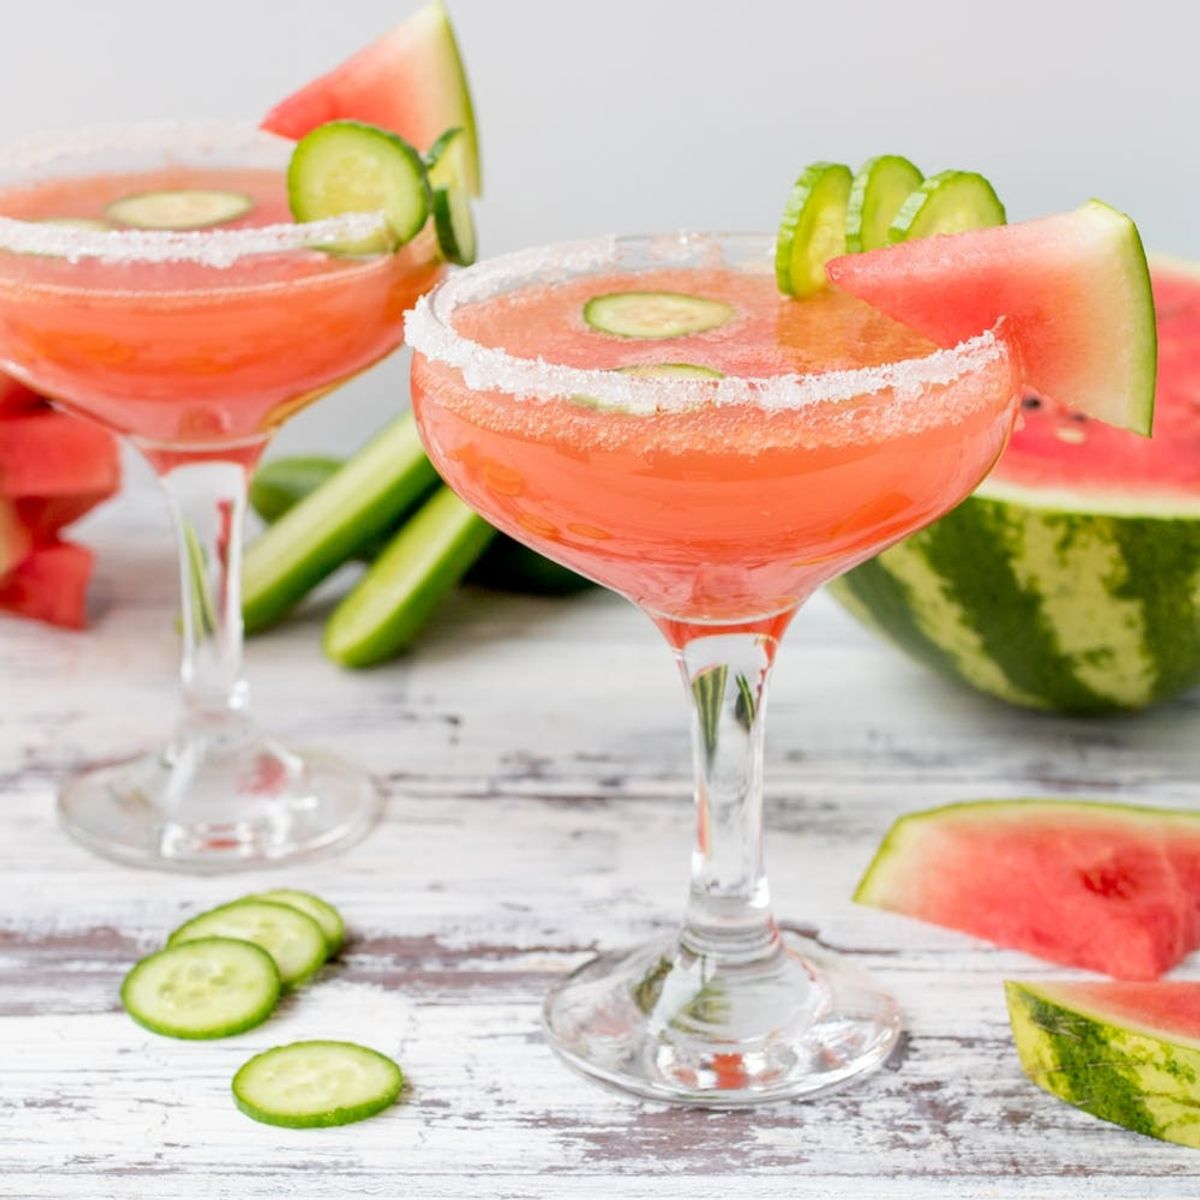 Surprise Your Mom With Our Watermelon Cucumber Mom-osa Recipe!